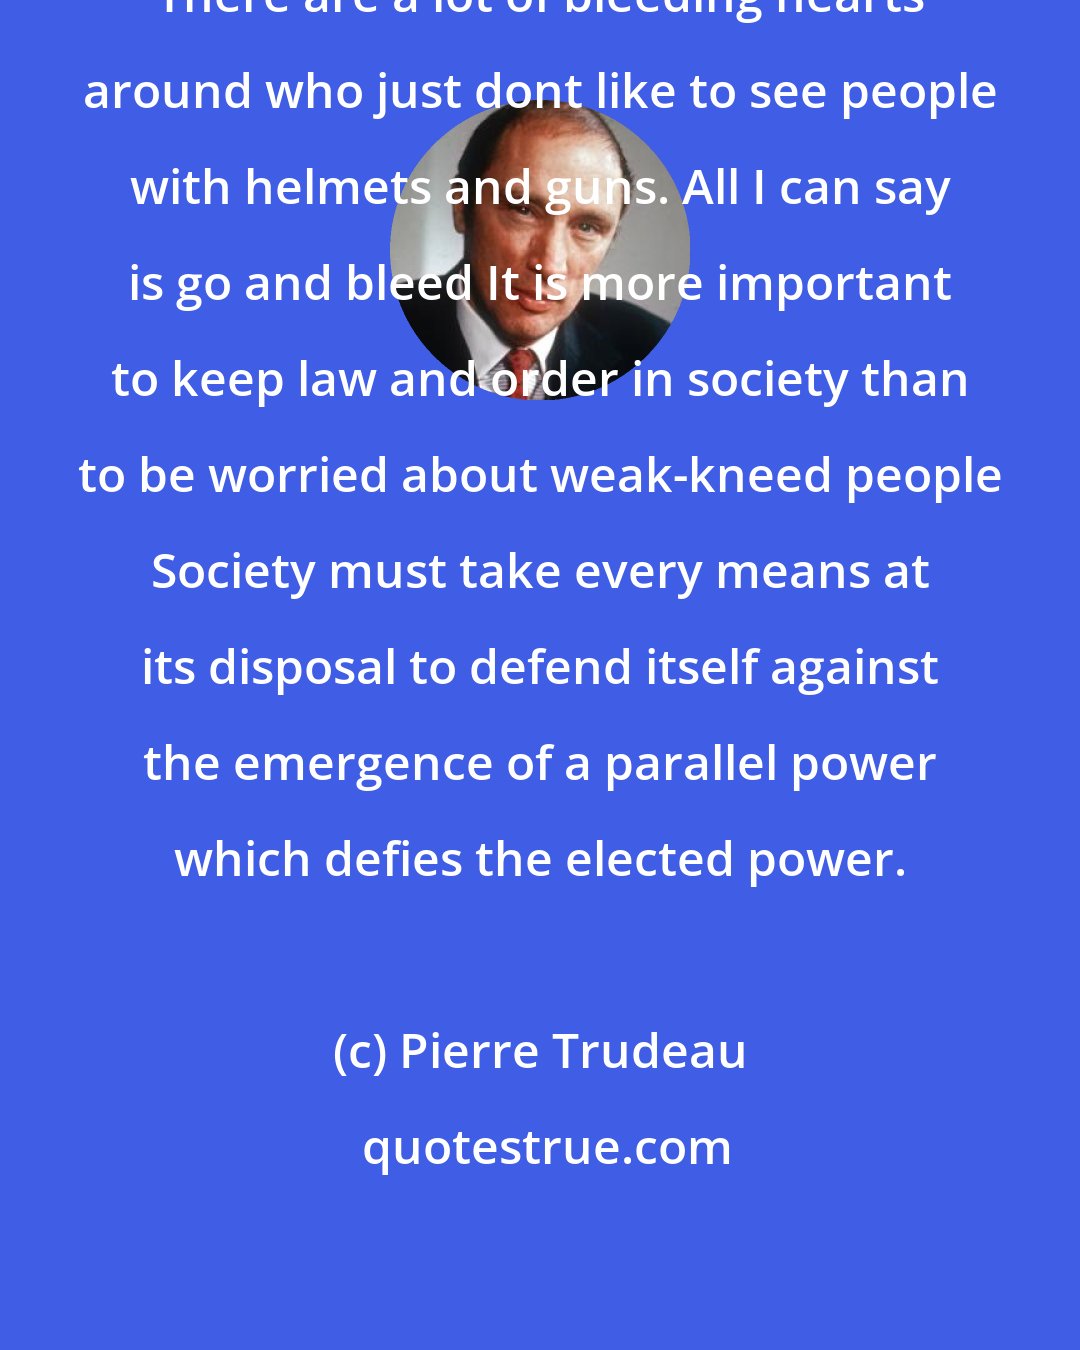 Pierre Trudeau: There are a lot of bleeding hearts around who just dont like to see people with helmets and guns. All I can say is go and bleed It is more important to keep law and order in society than to be worried about weak-kneed people Society must take every means at its disposal to defend itself against the emergence of a parallel power which defies the elected power.